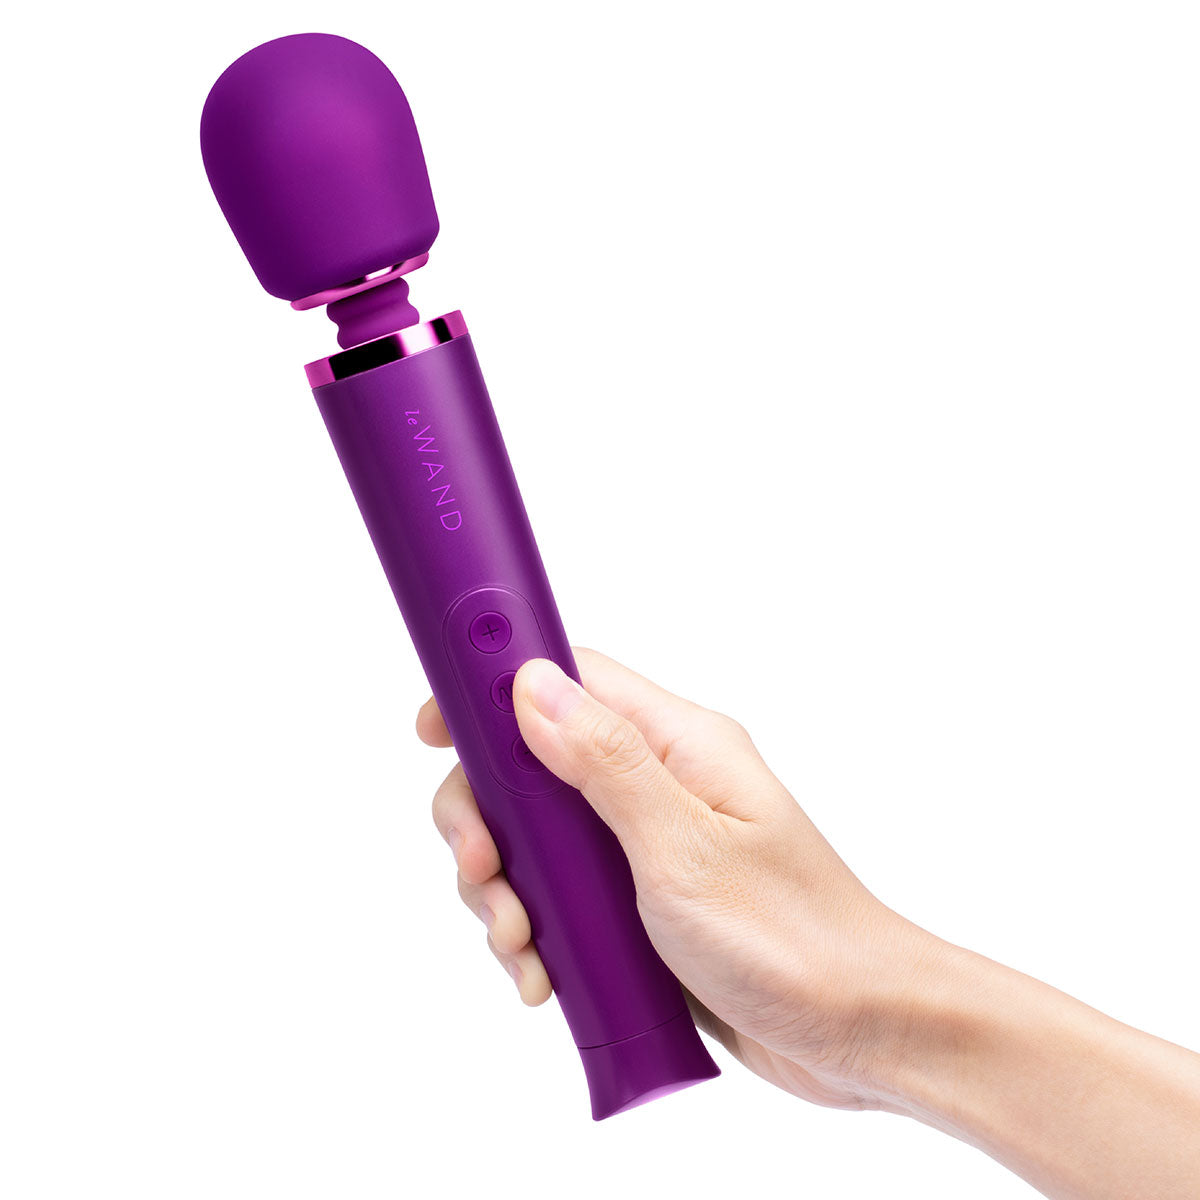 Le Wand Petite Massager - Dark Cherry Intimates Adult Boutique